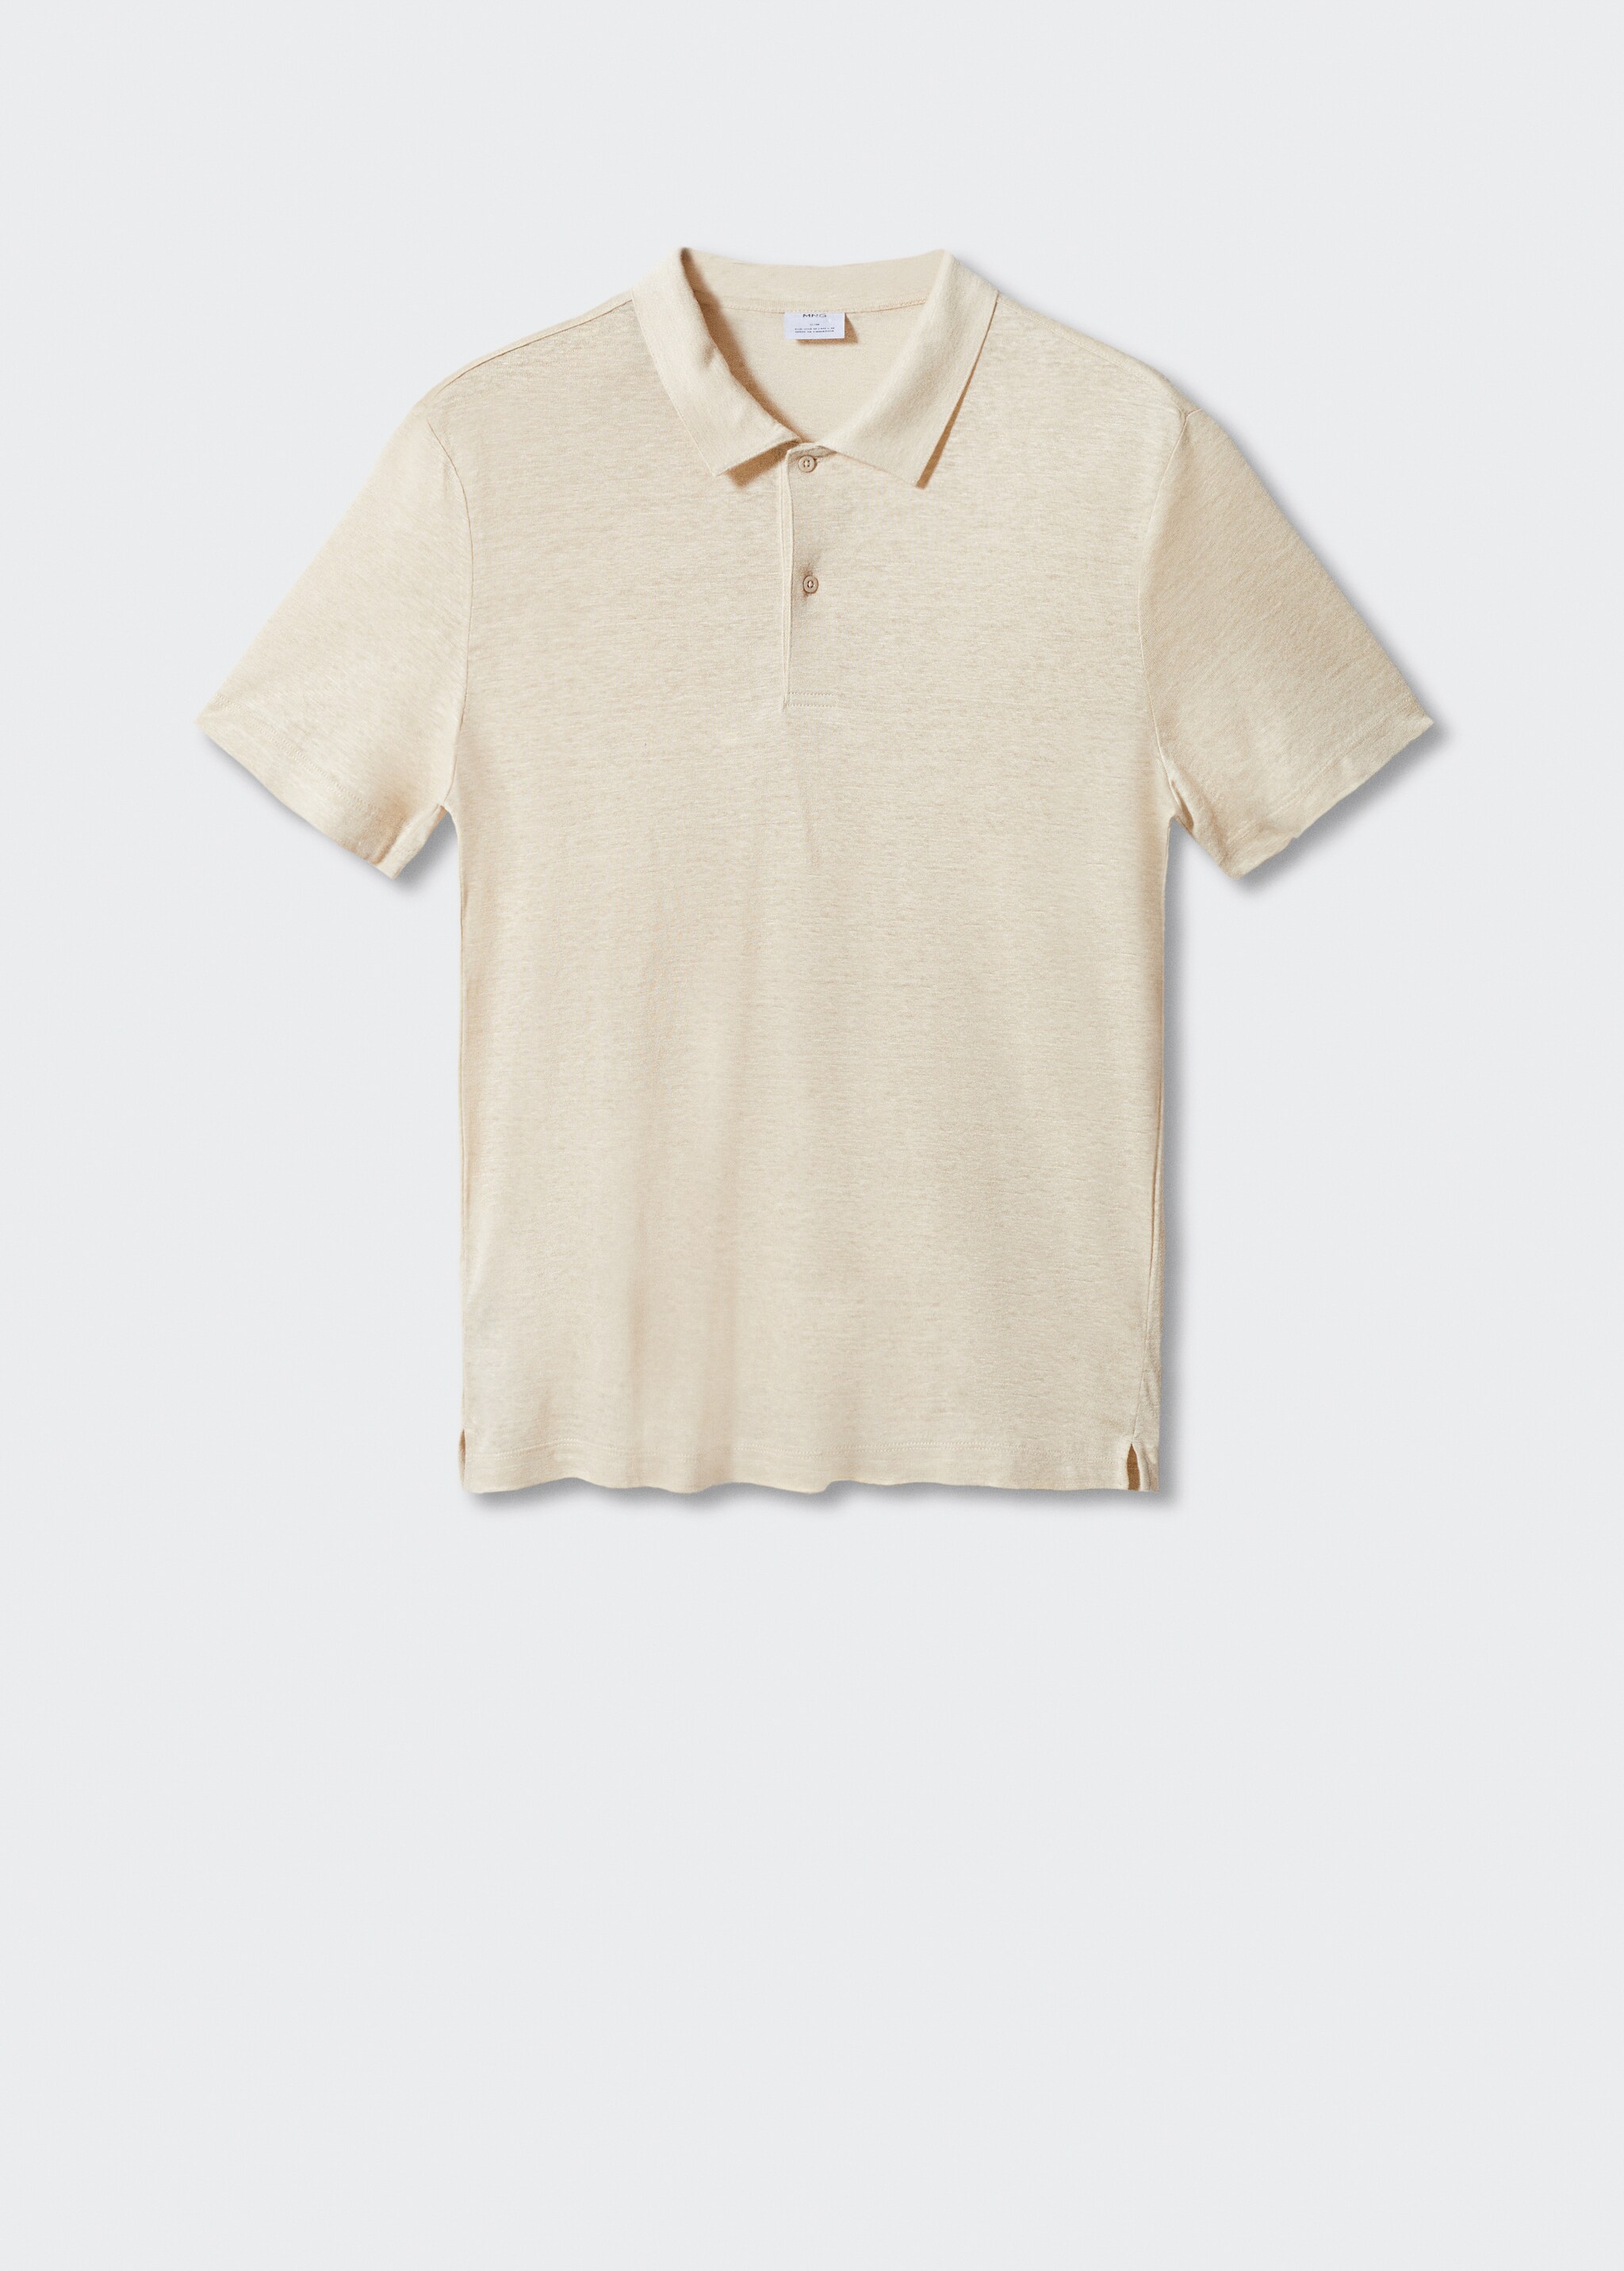 Slim fit 100% linen polo shirt - Article without model